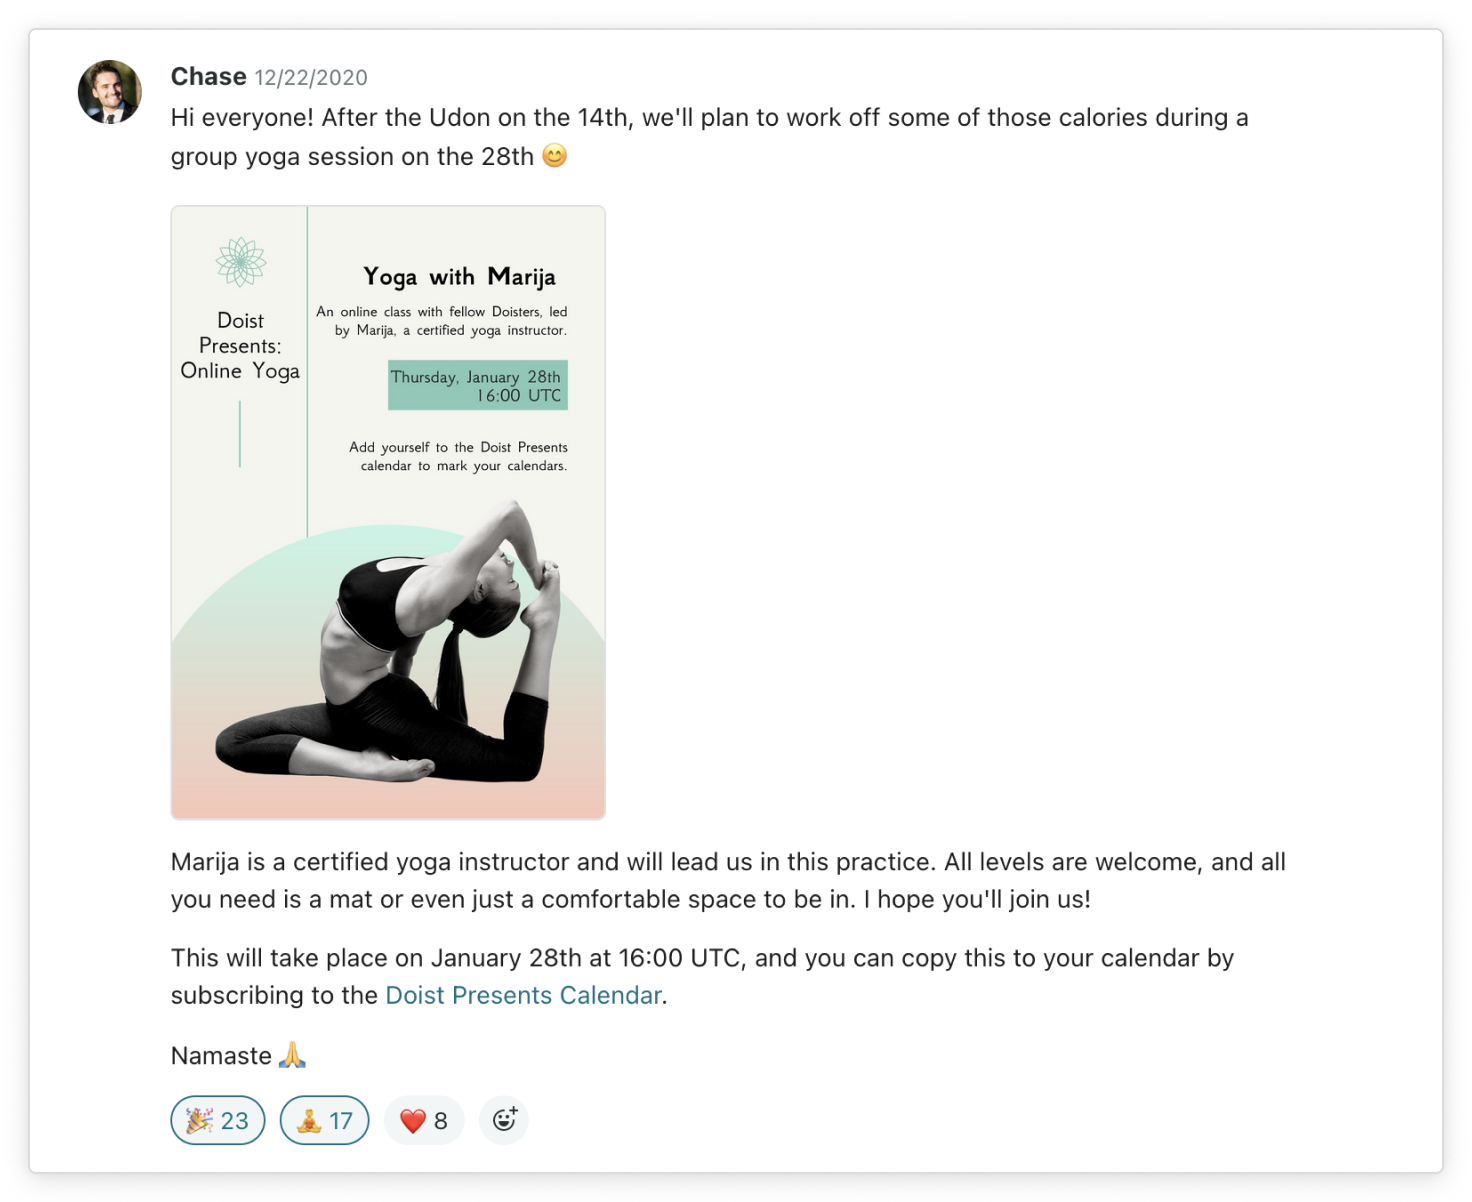 A screenshot shows a Twist message from Chase advertising a Doist Presents event, "Yoga with Marija." End description.